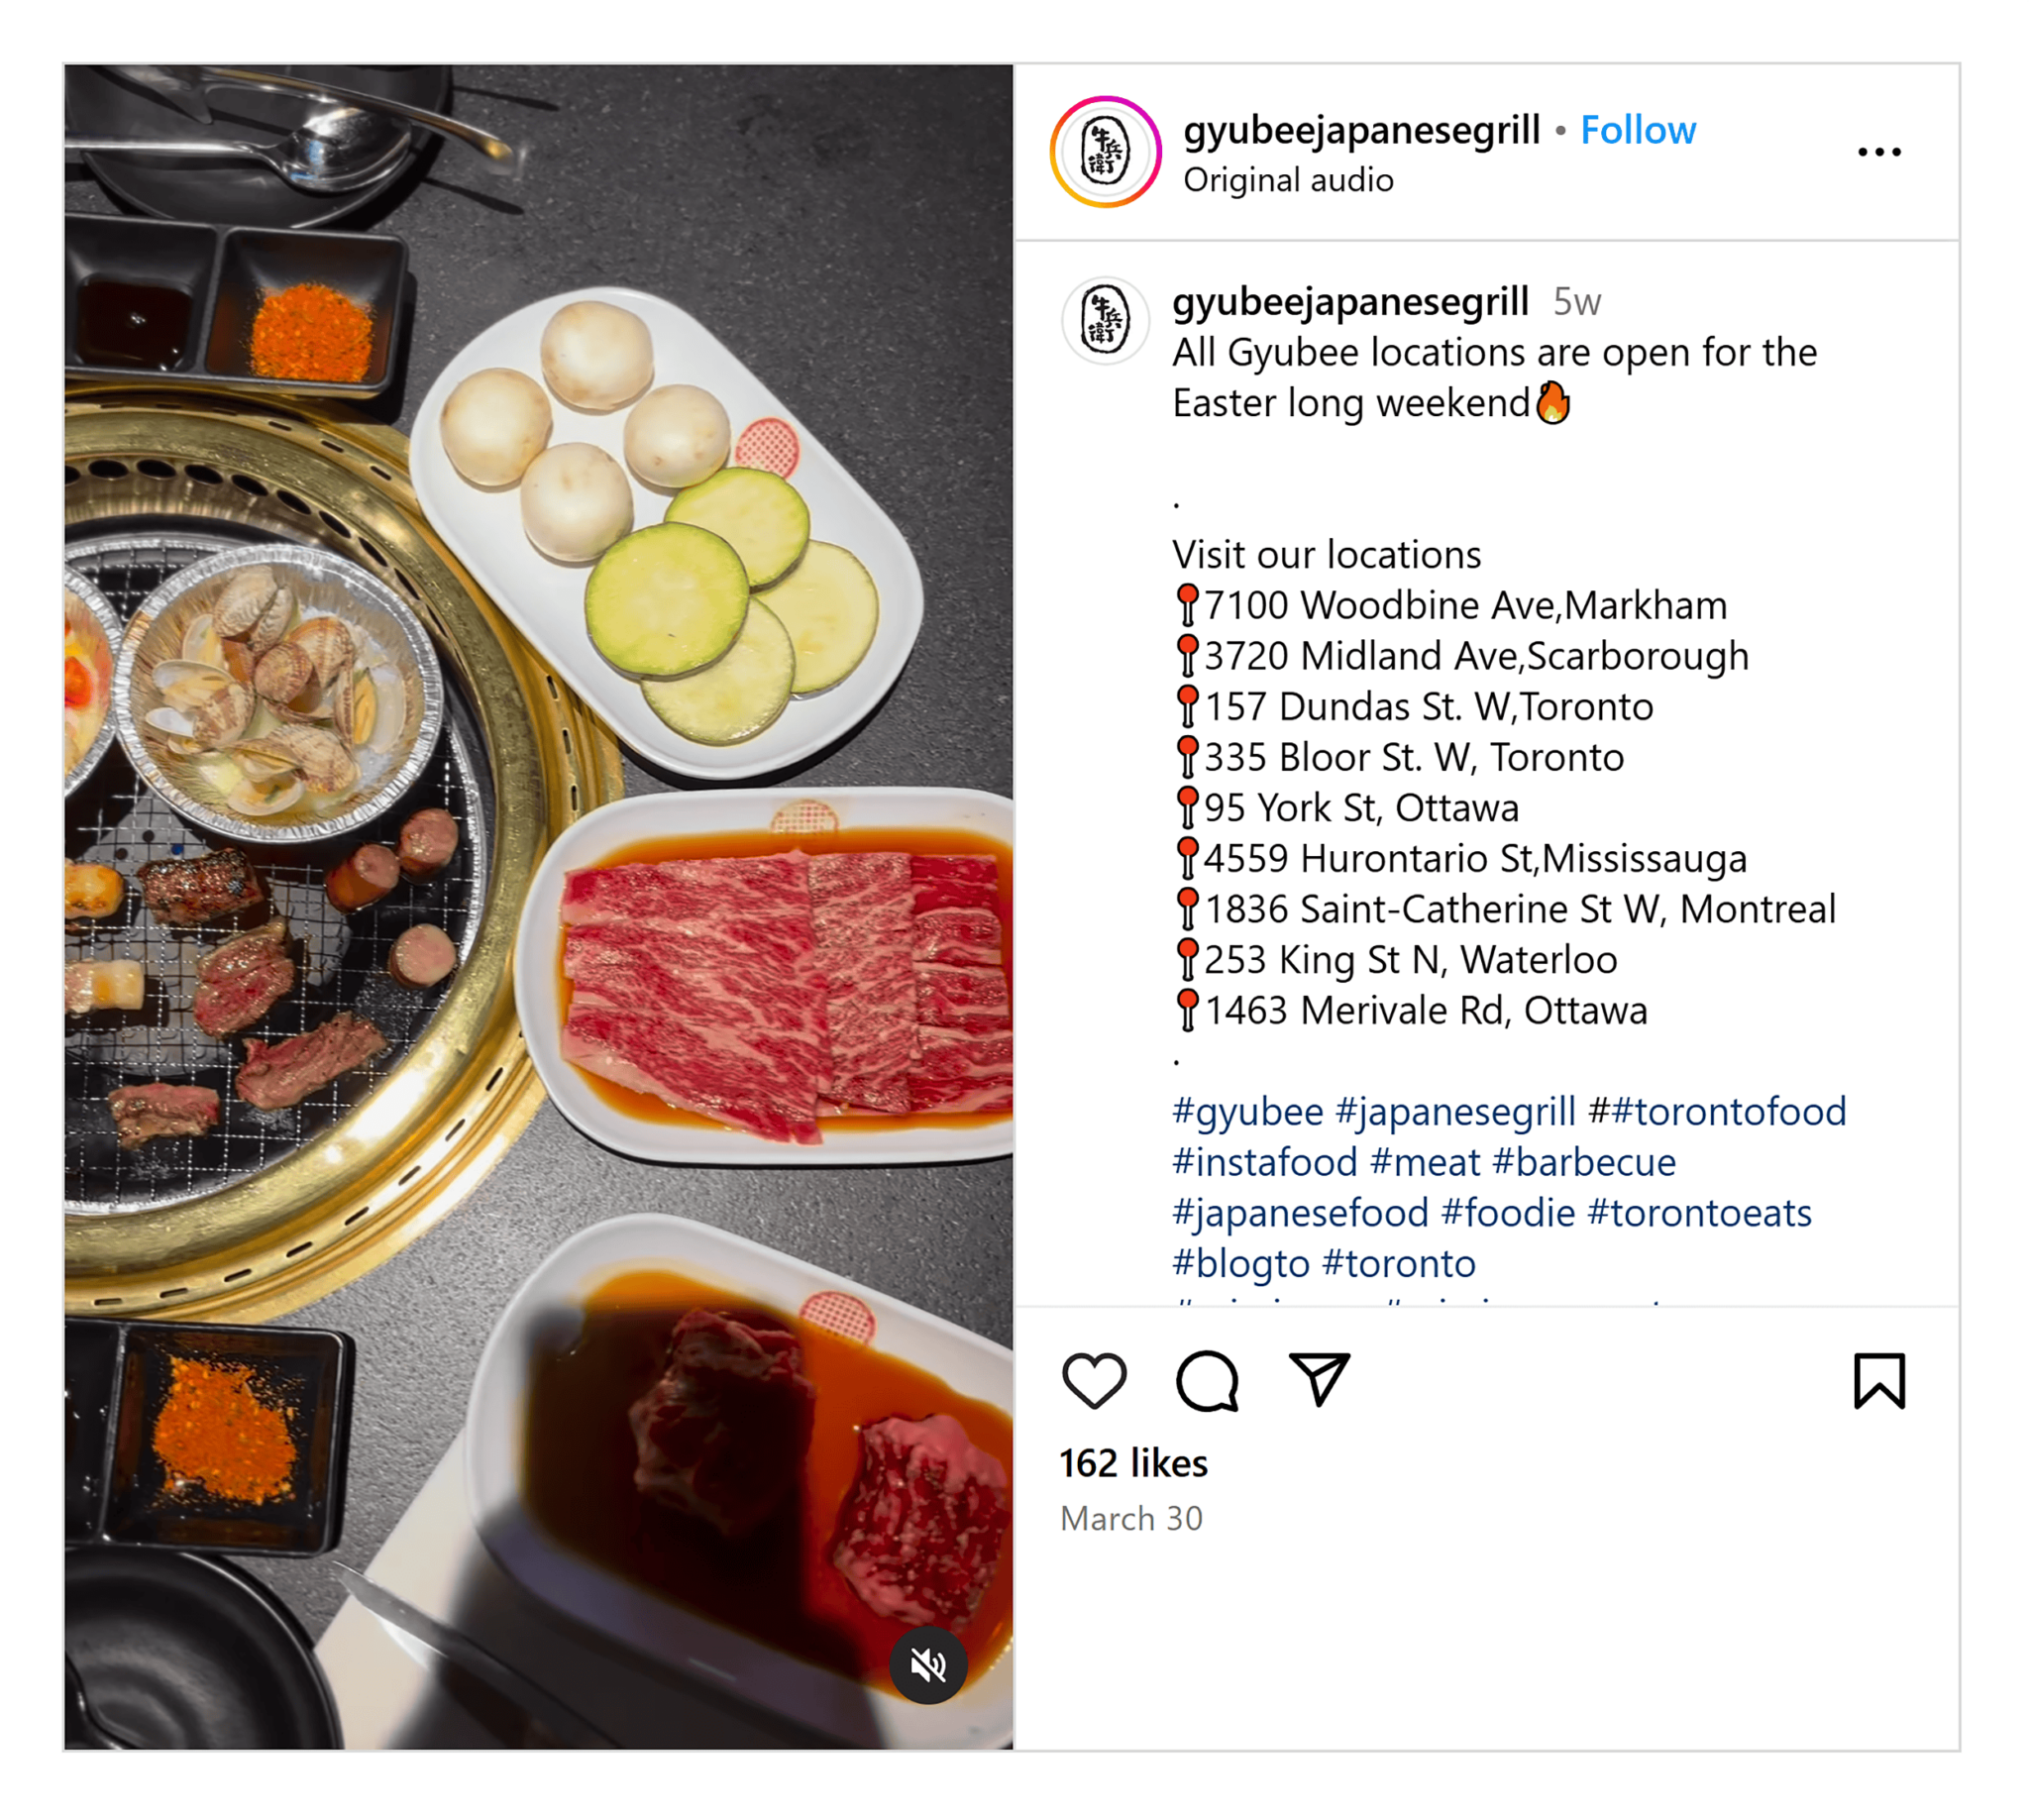 gyubee-japanese-grill-instagram-video Small Business Marketing: 6 Proven Strategies for More Reach